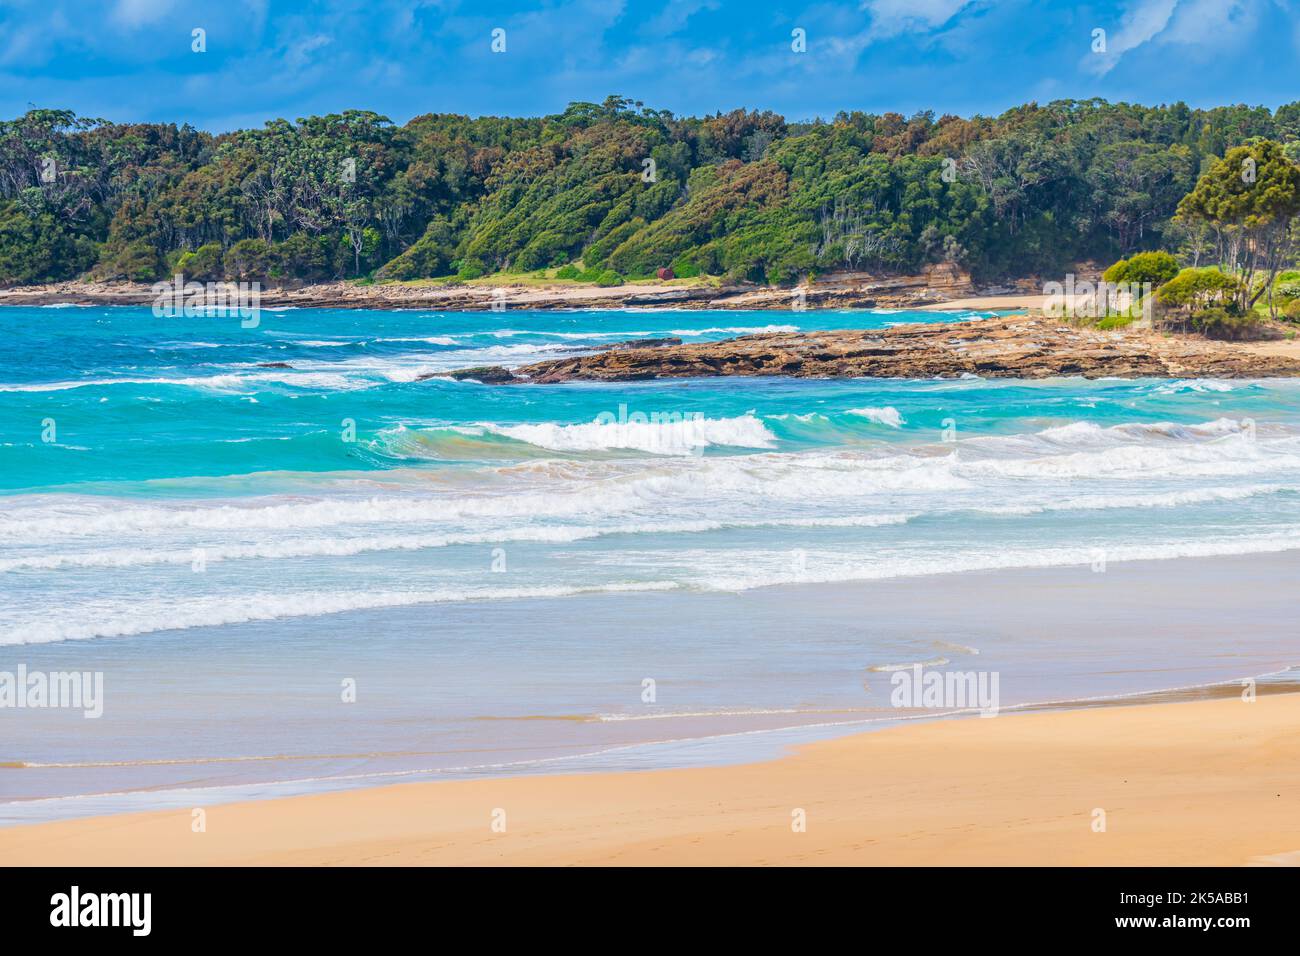 Exploring the beach at South Durras on the South Coast of NSW, Australia Stock Photo